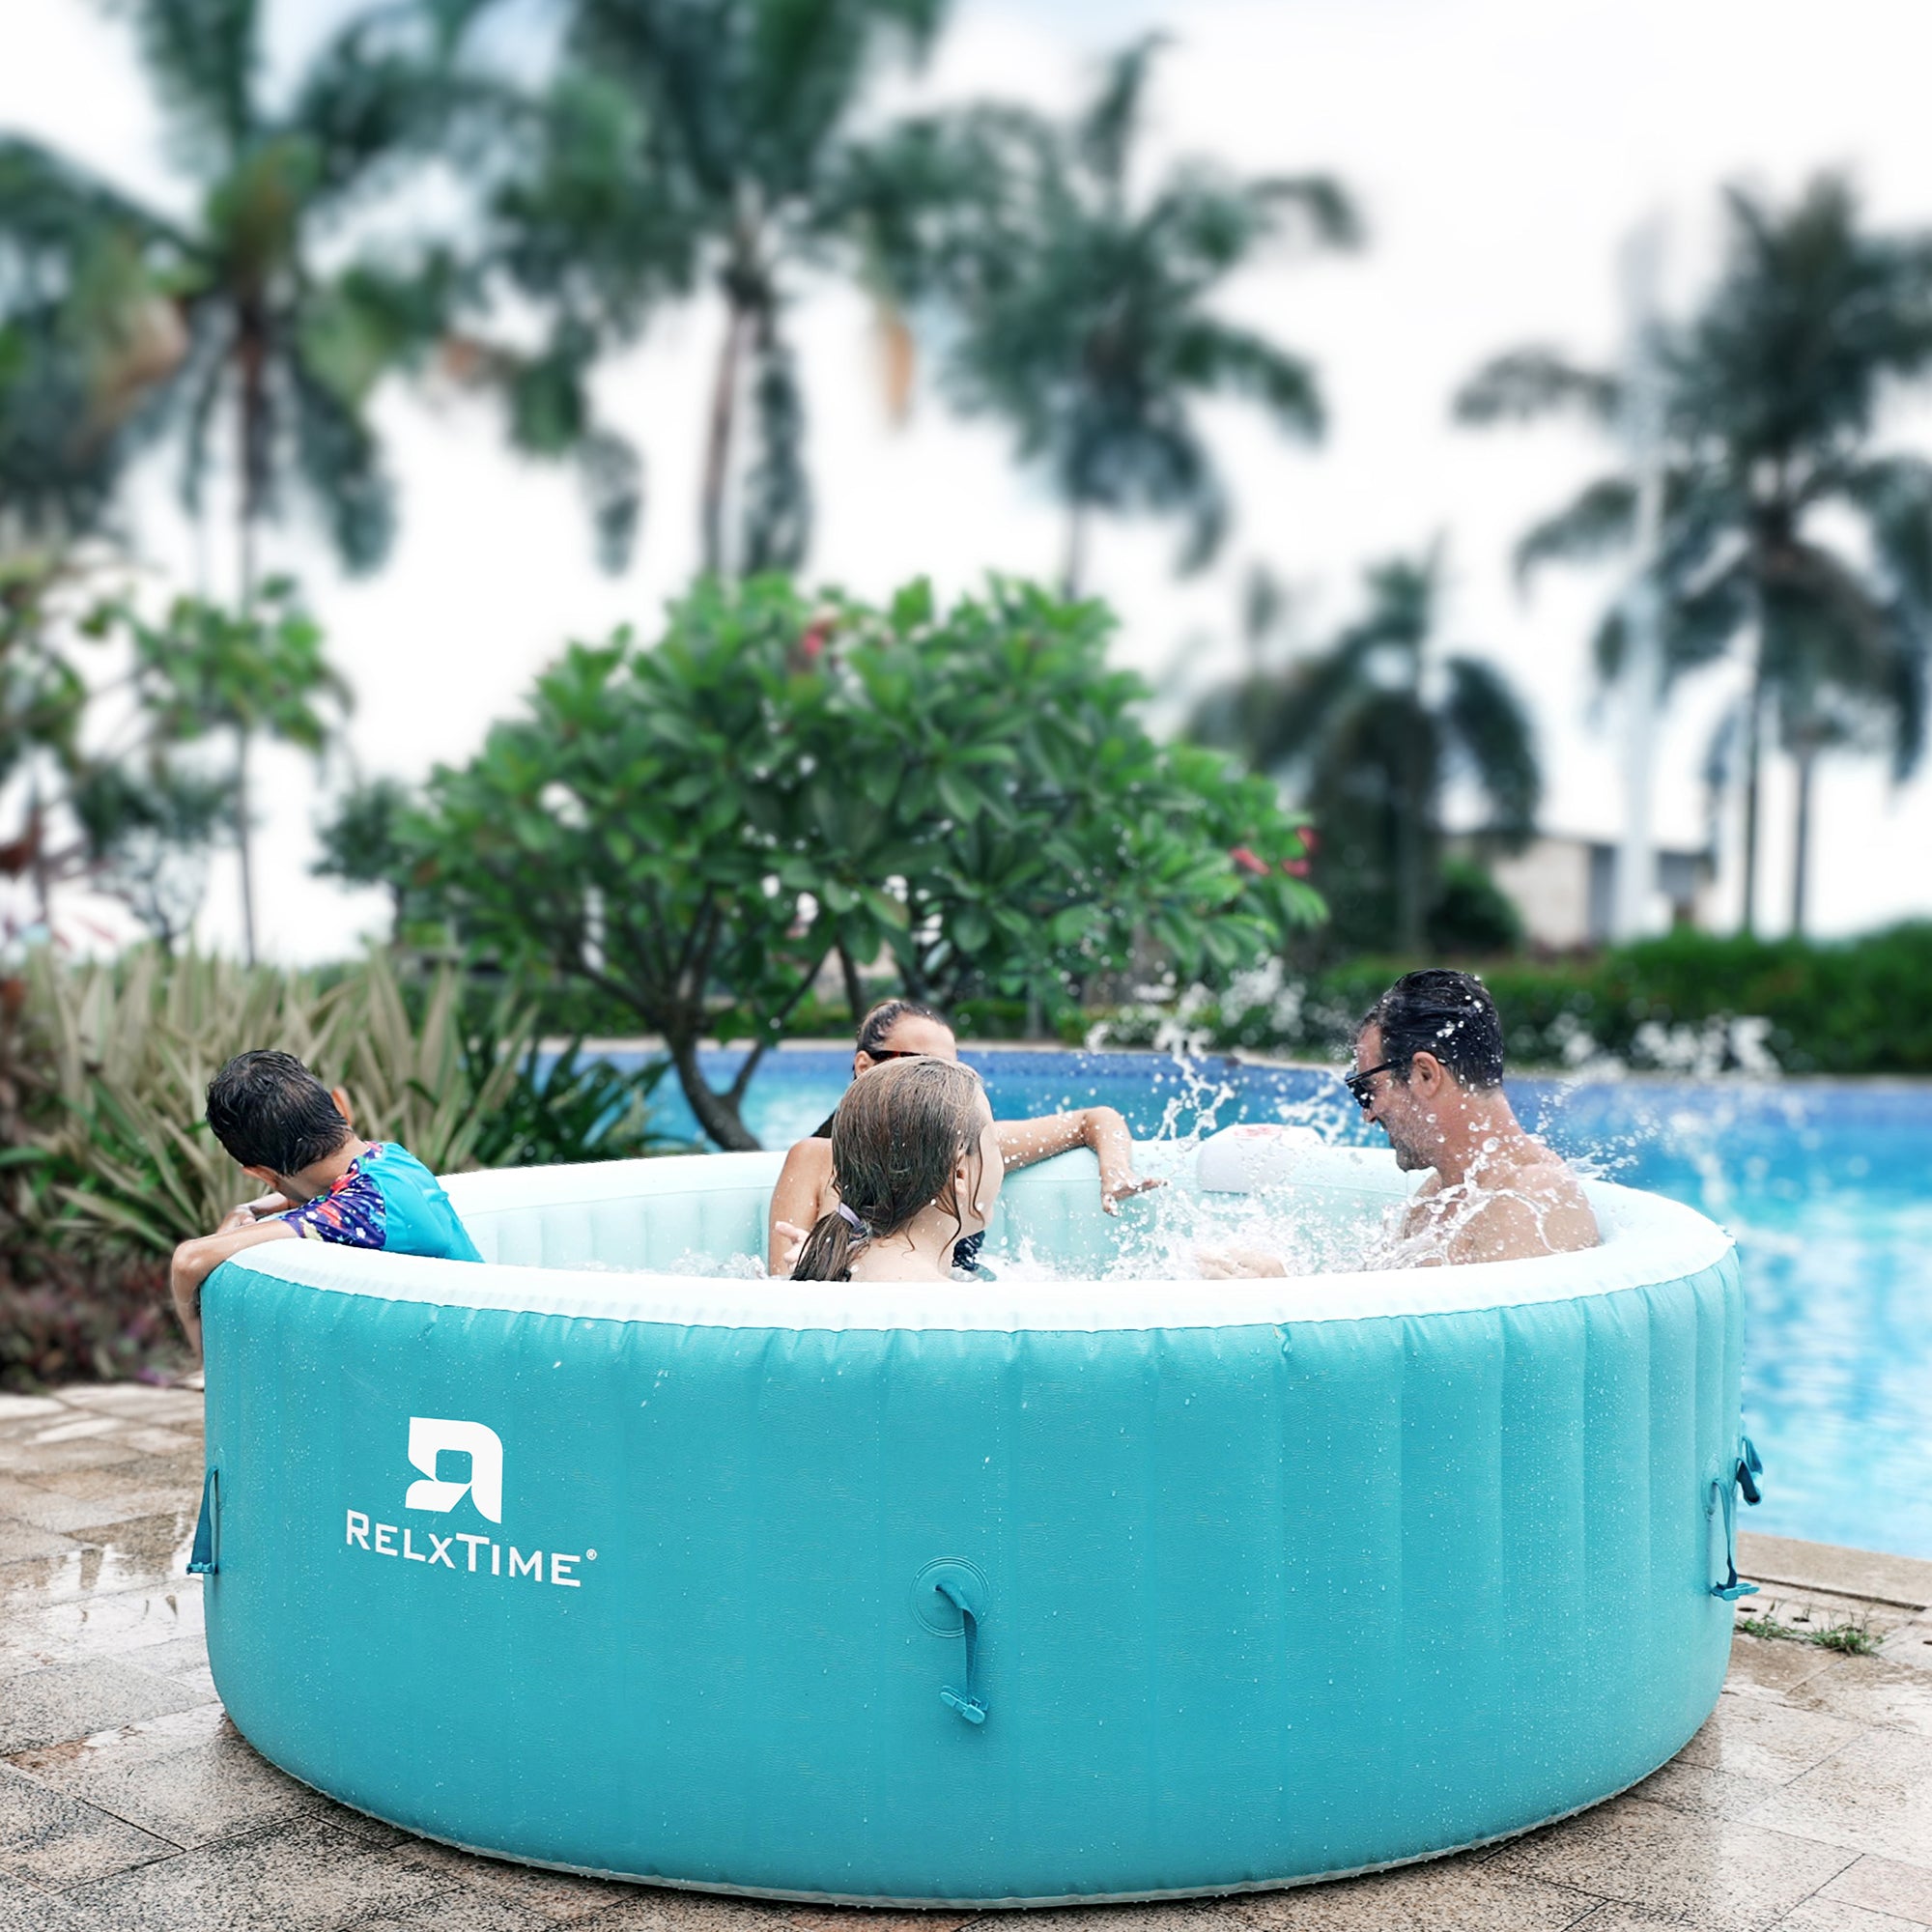 Relxtime 6 Person Round Inflatable Hot Tub 130 Massaging Air Jets Green Laminated Classic Spa